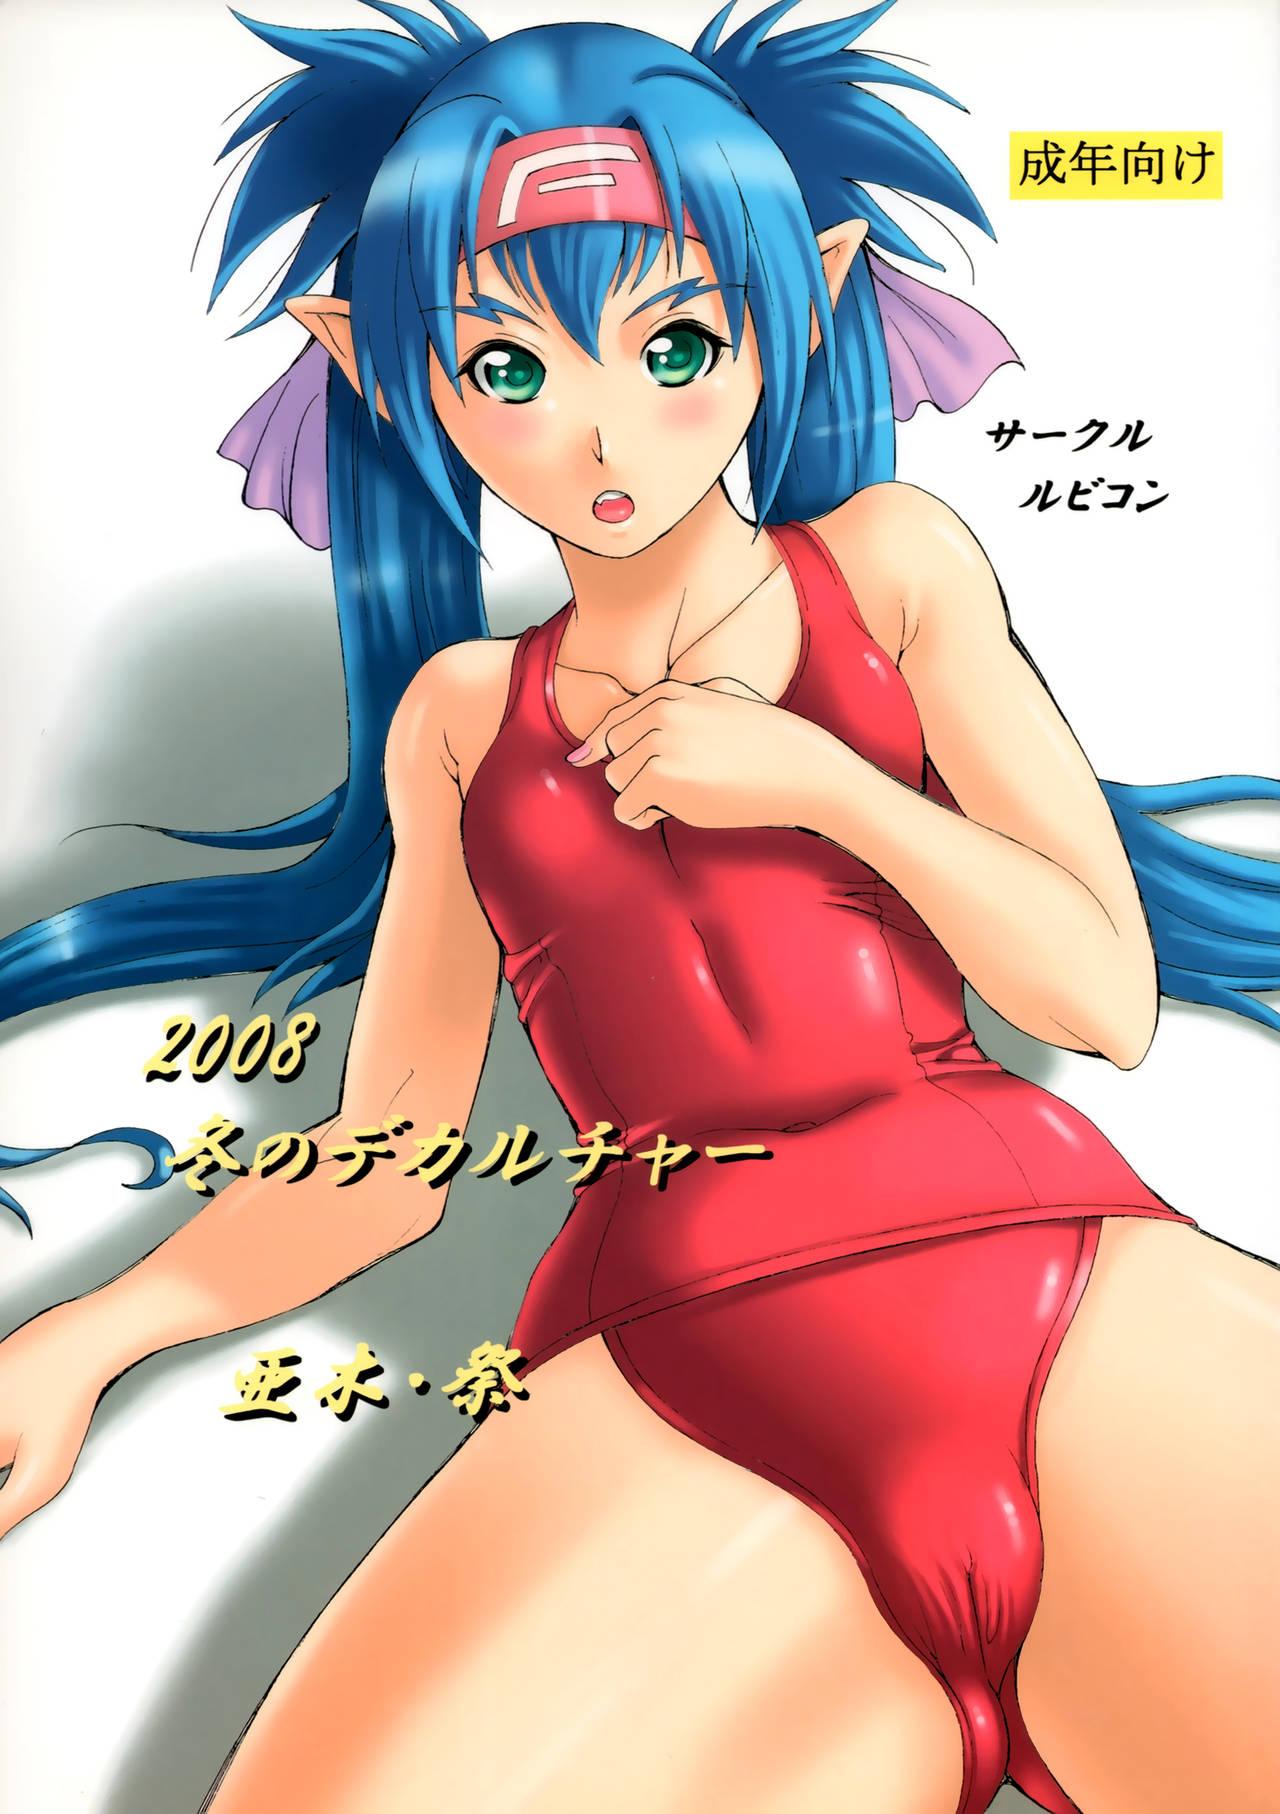 Spying 2008 Fuyu no Deculture - Macross frontier Exhibitionist - Page 1